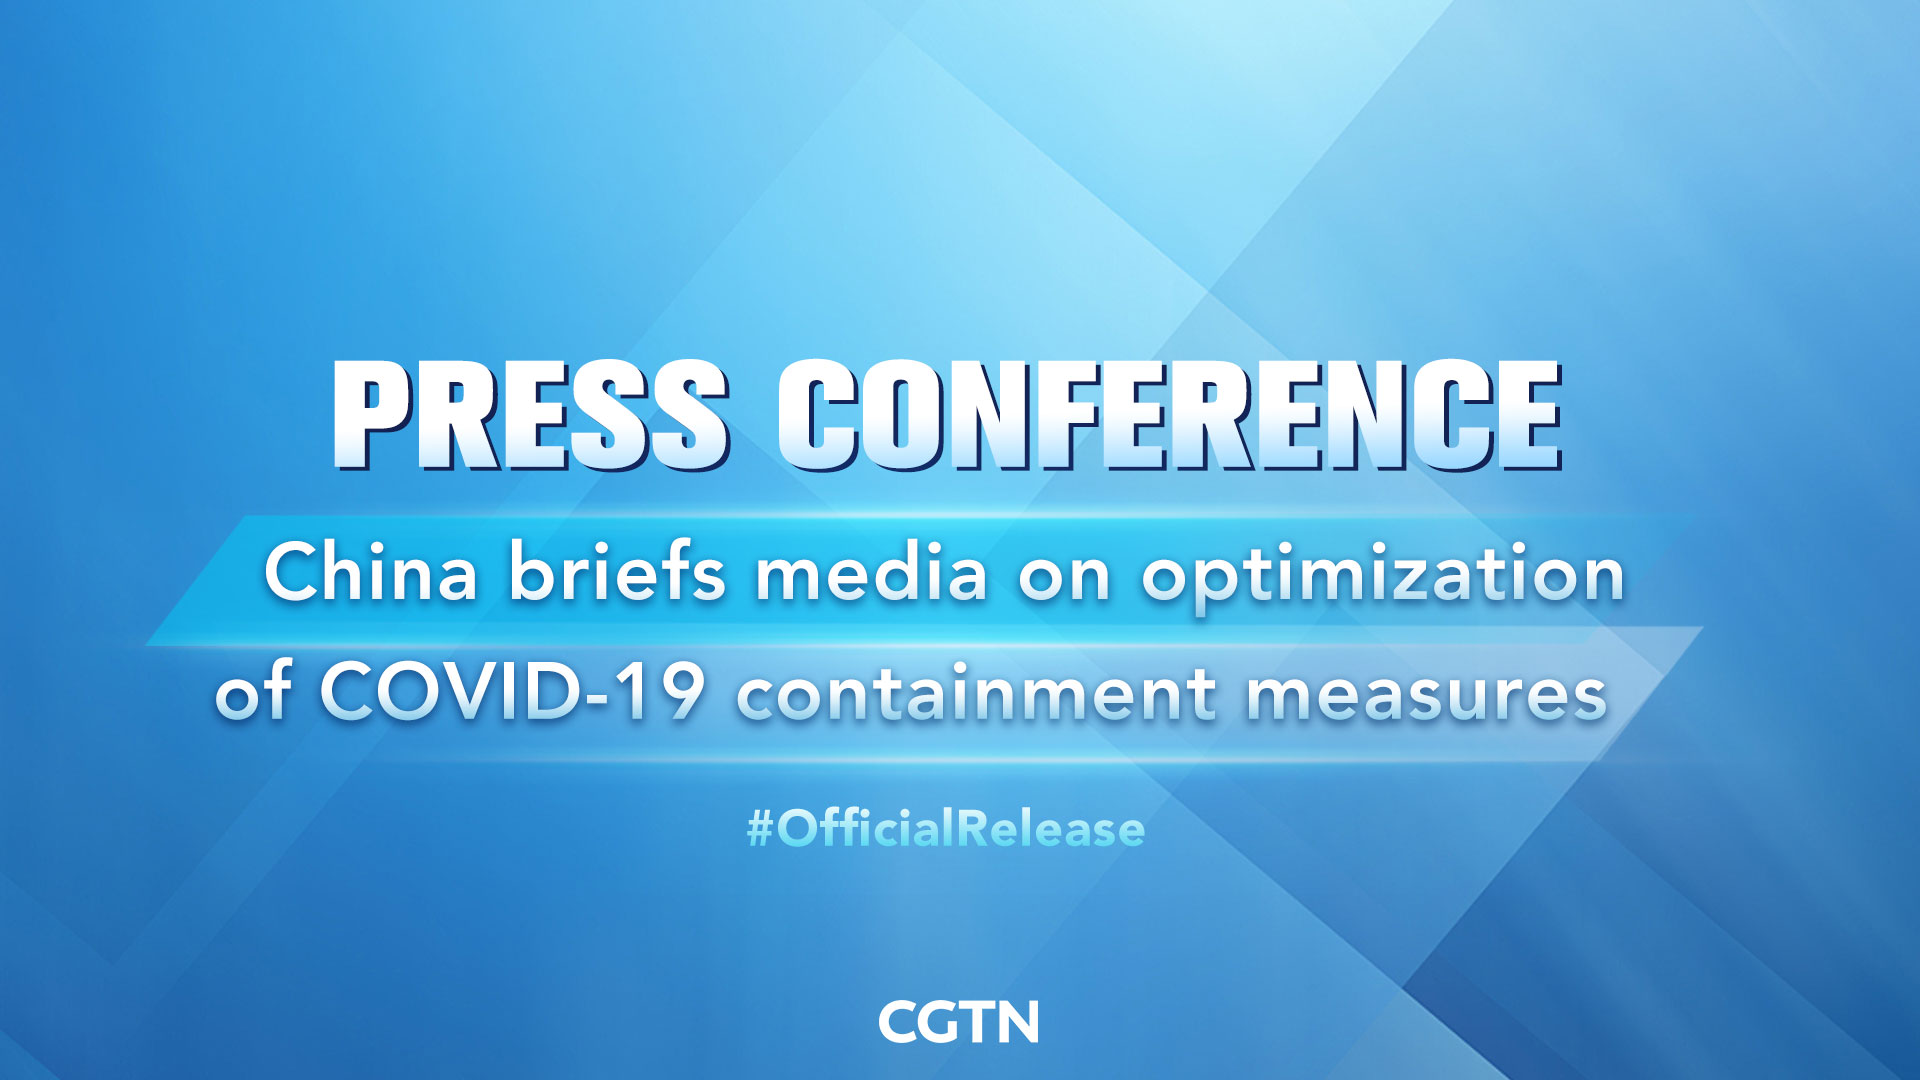 Live: China briefs media on optimization of COVID-19 containment measures